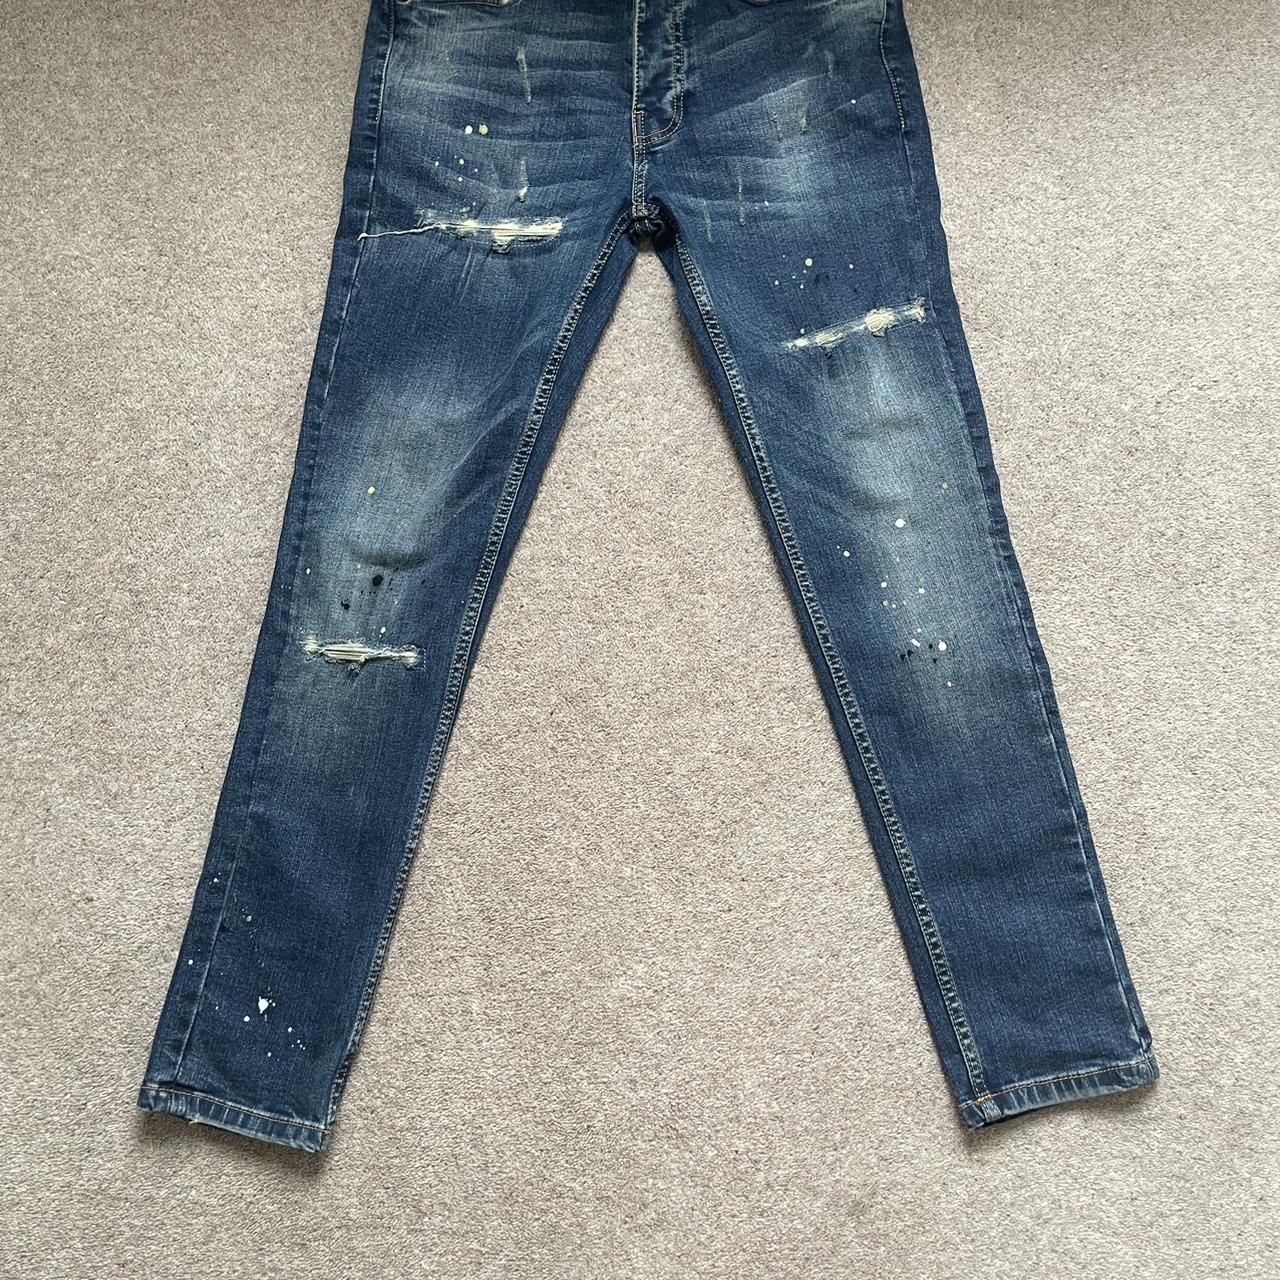 Valere milano ripped tapered jeans 30R Excellent... - Depop